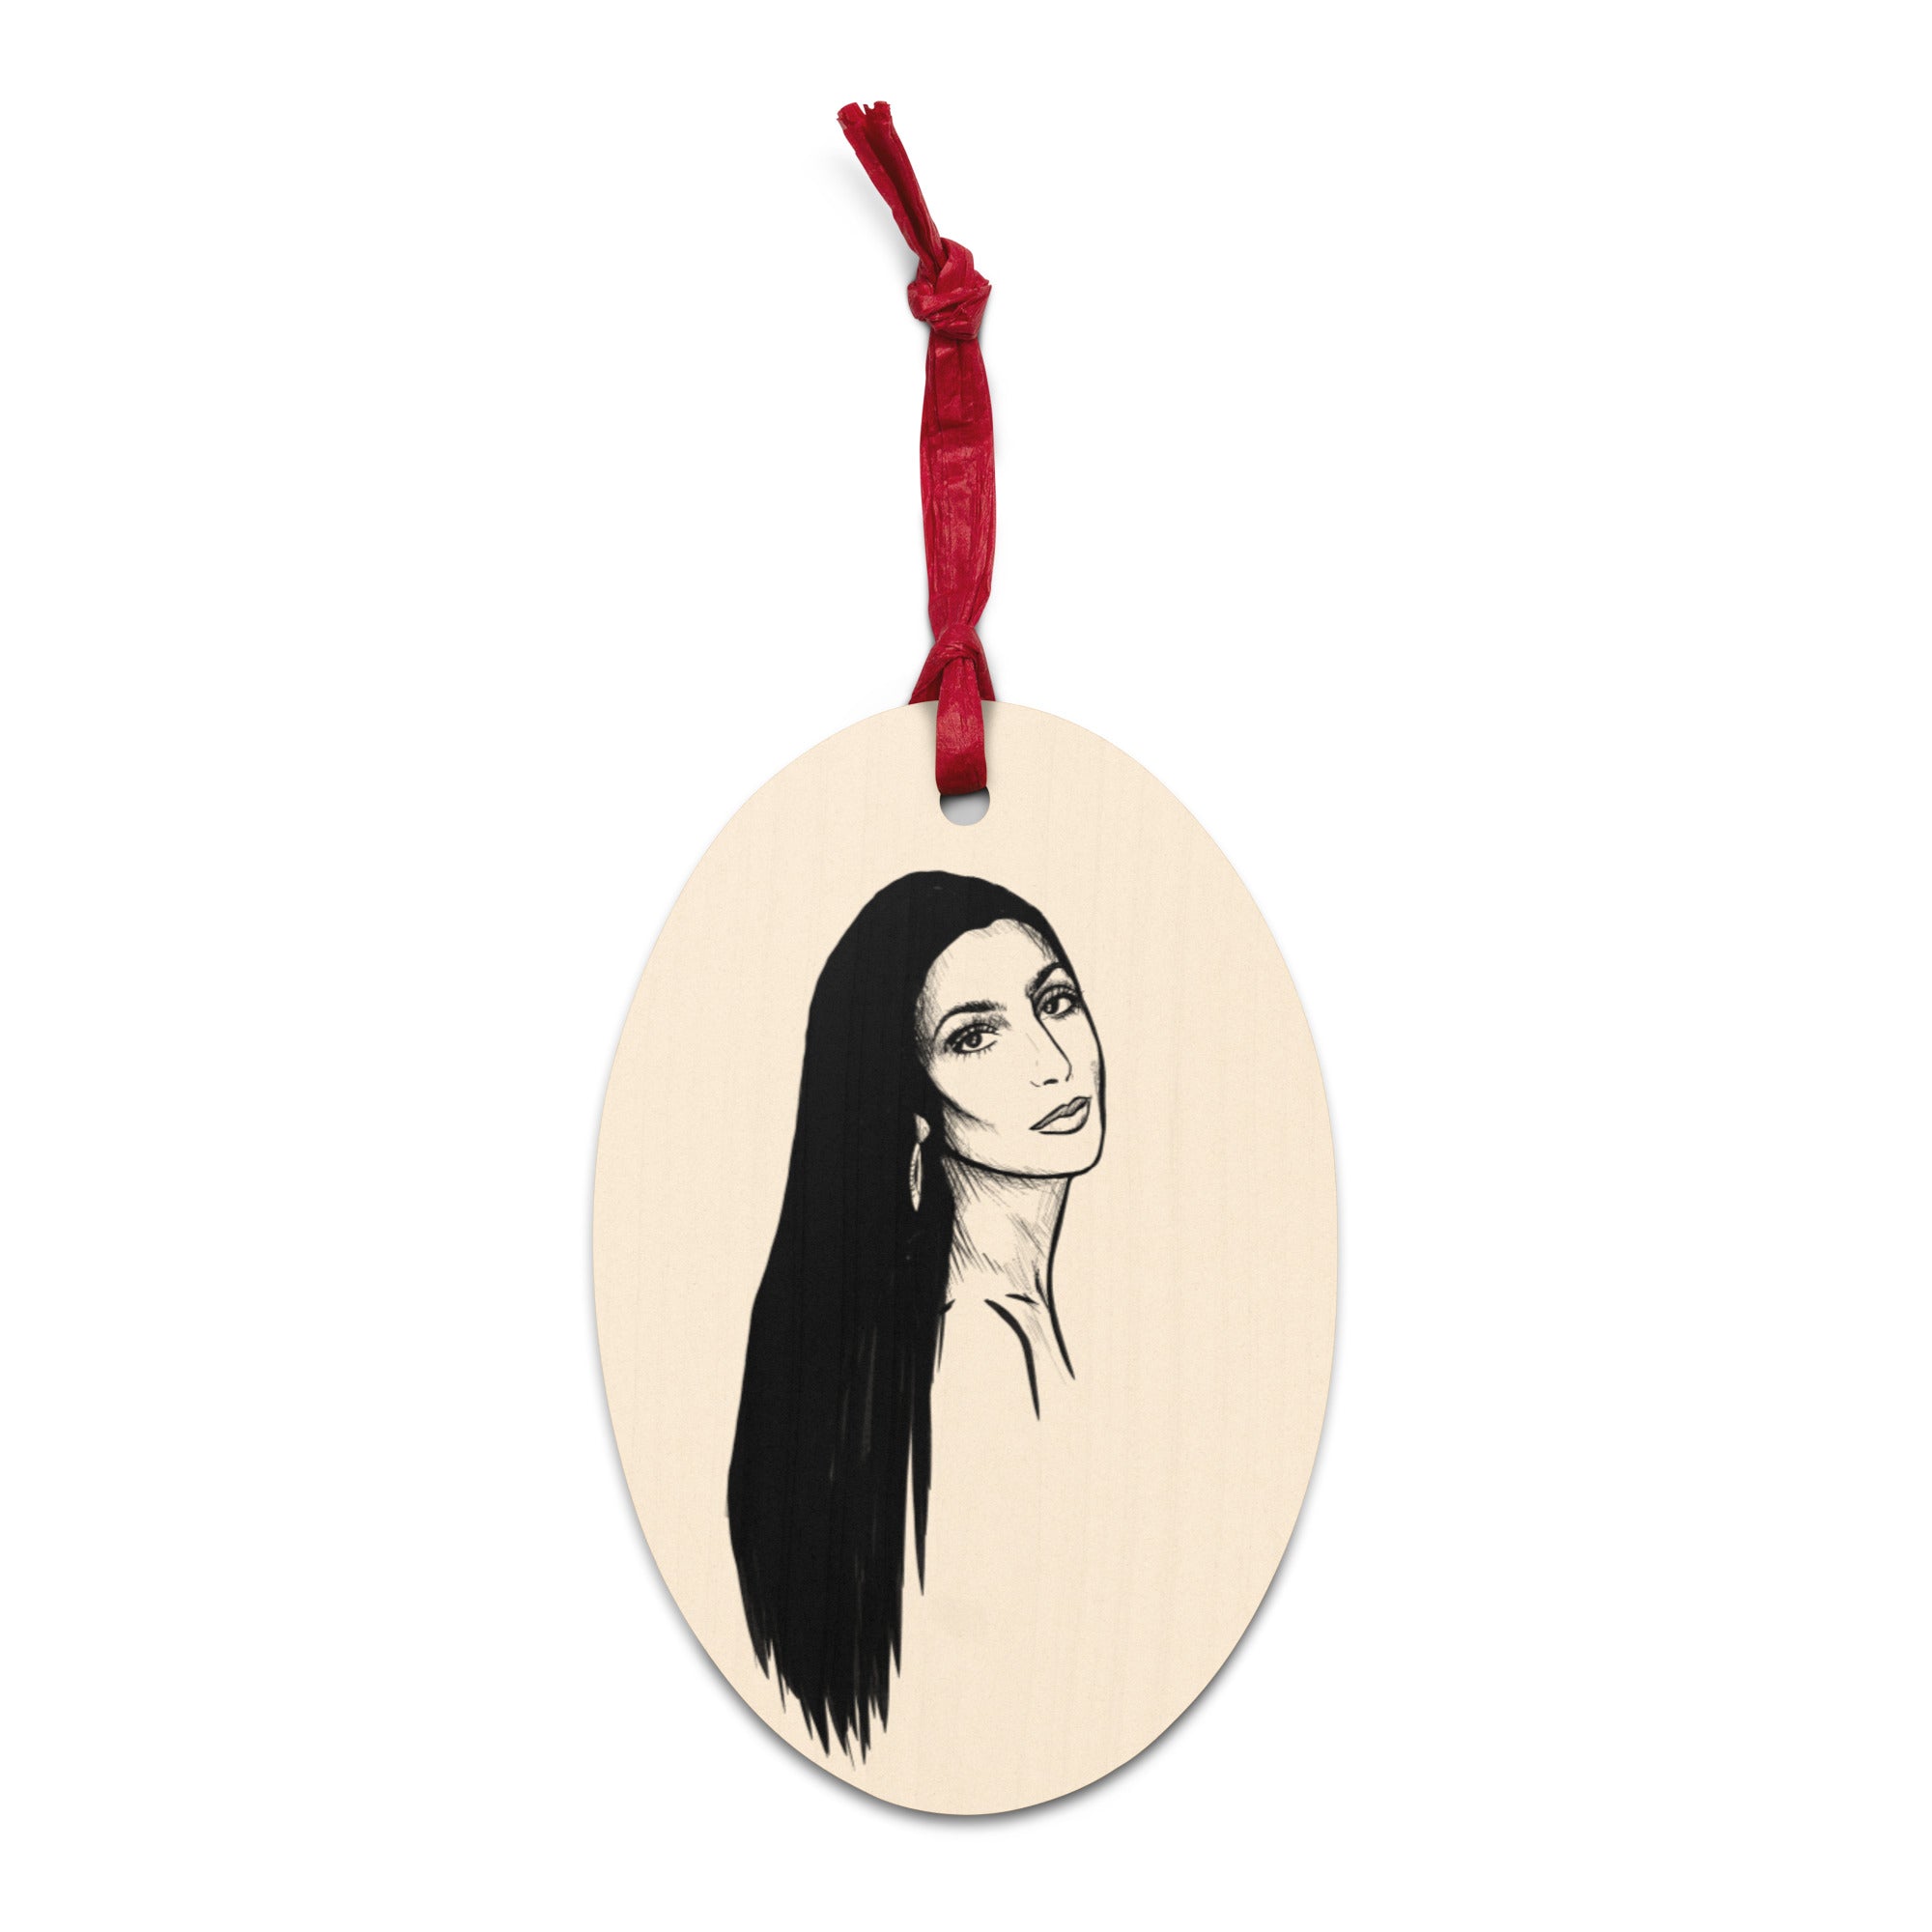 70's Cher Line Art Printed Vintage Style Wooden Christmas Tree Holiday Ornament - Retro Print Back